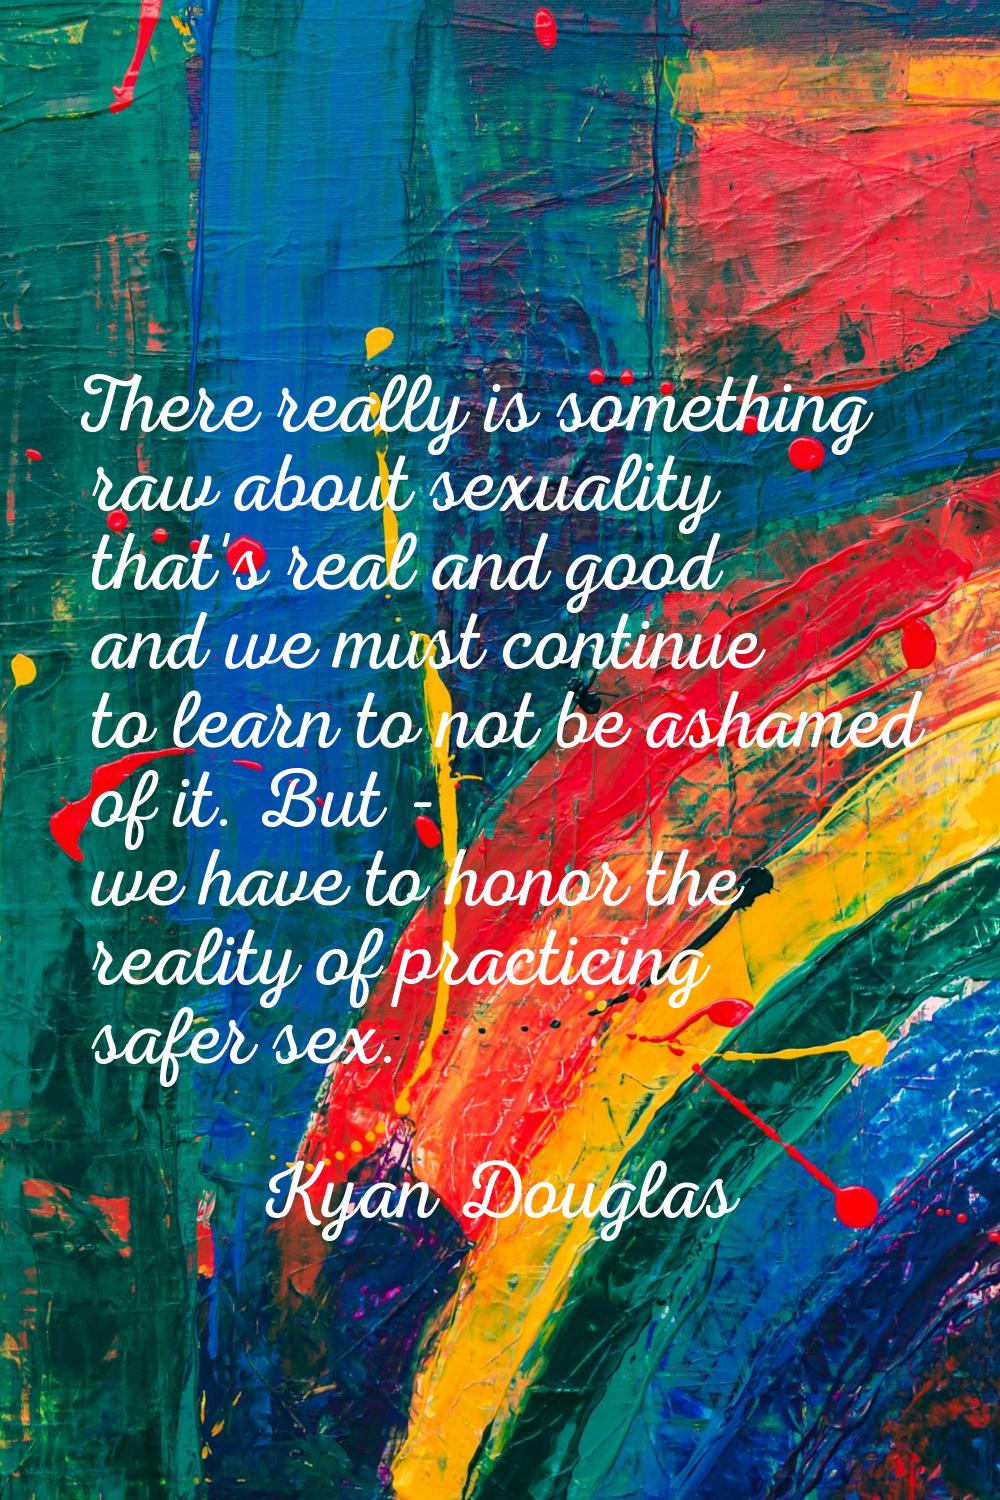 There really is something raw about sexuality that's real and good and we must continue to learn to